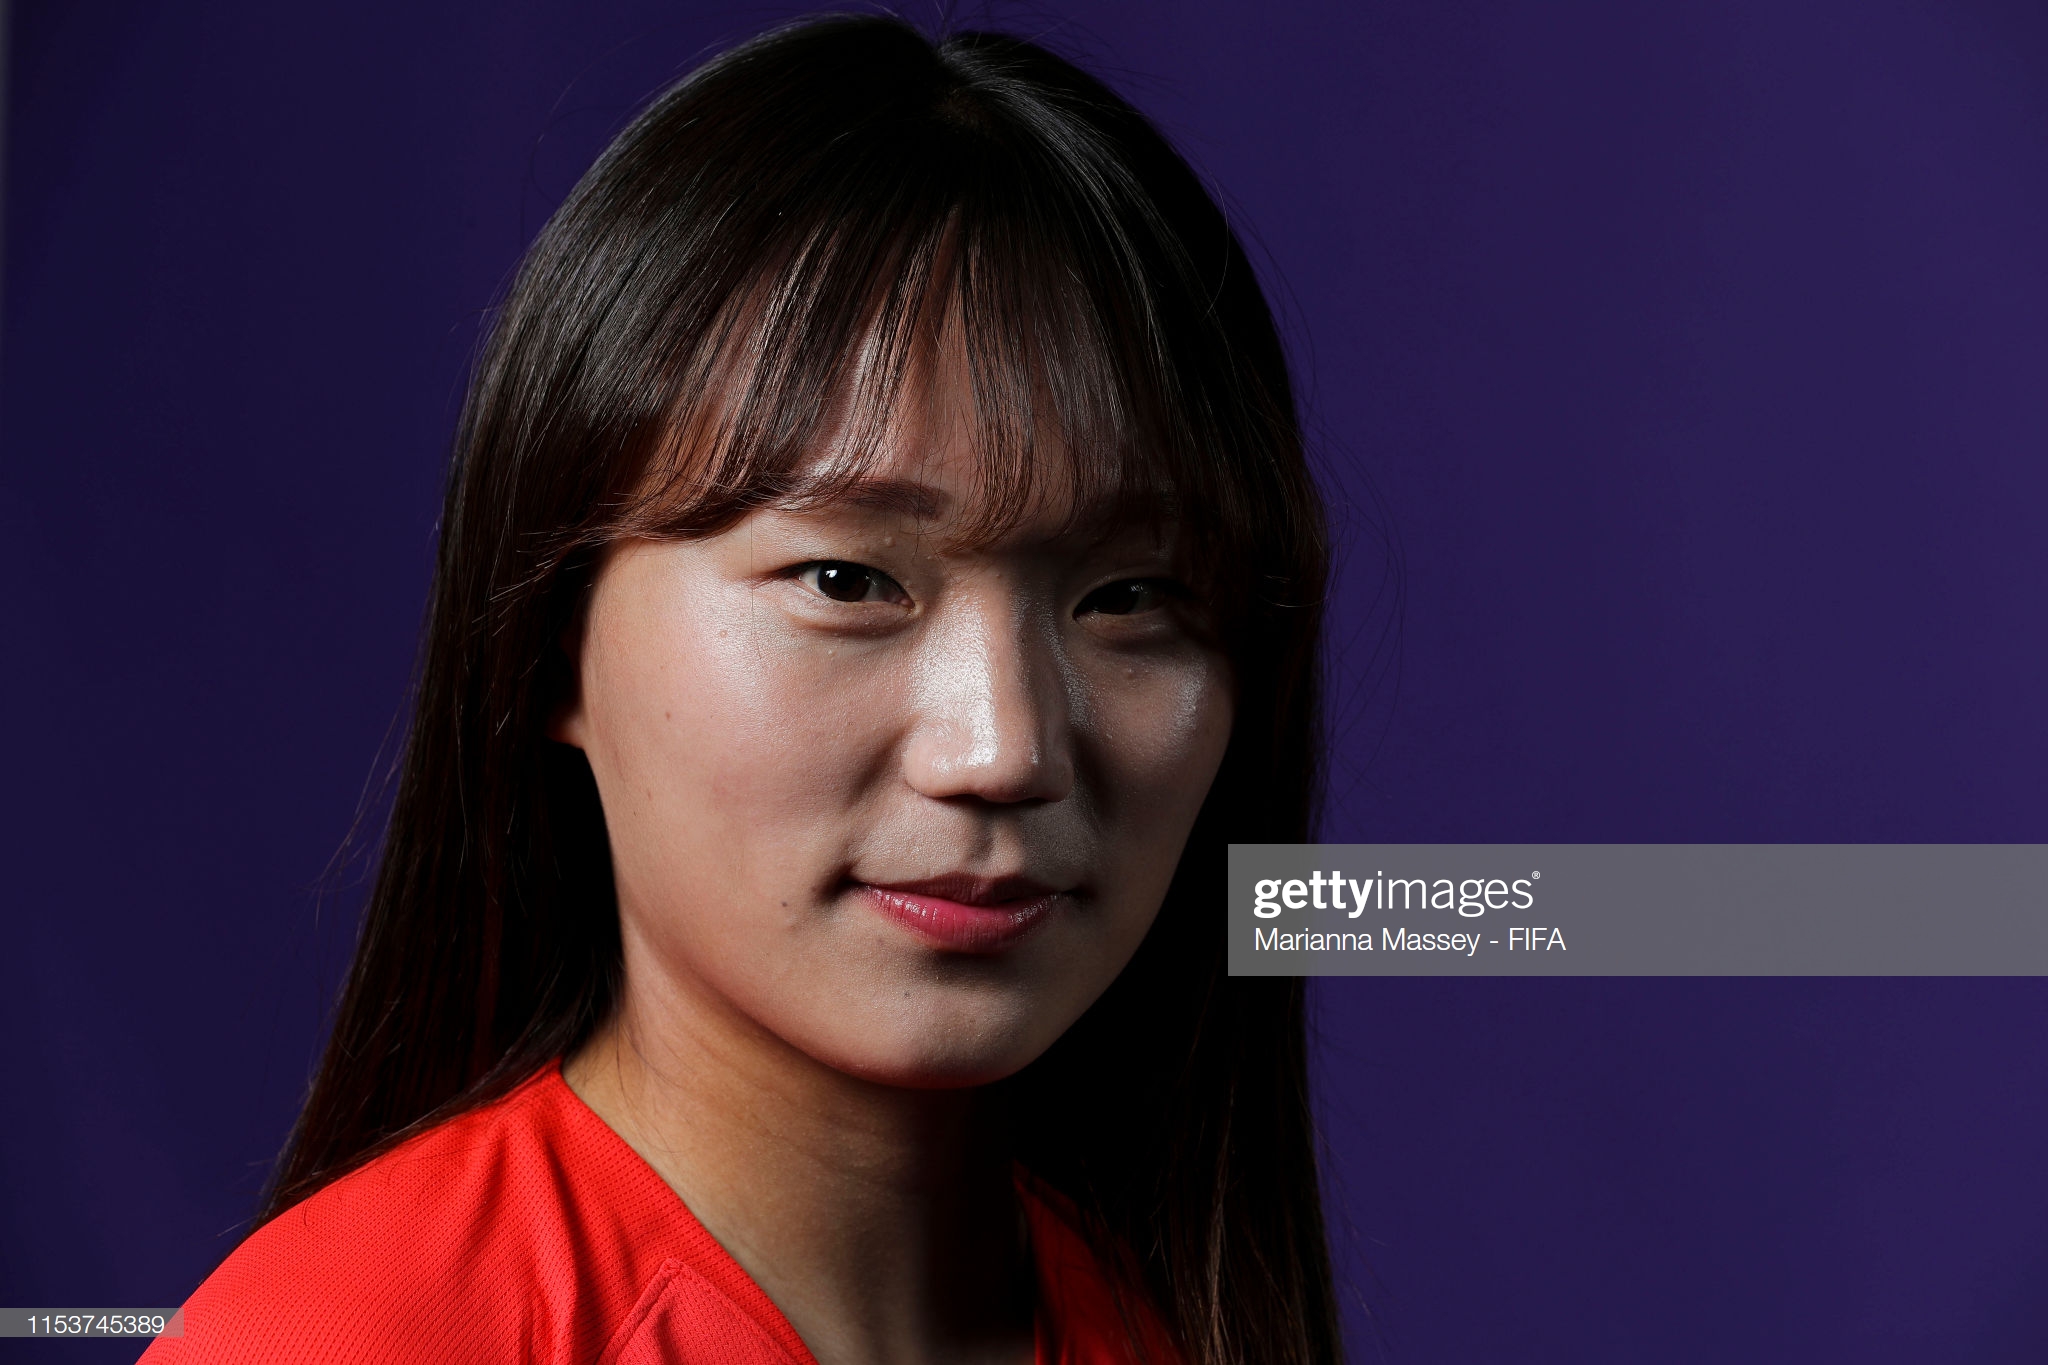 gettyimages-1153745389-2048x2048.jpg